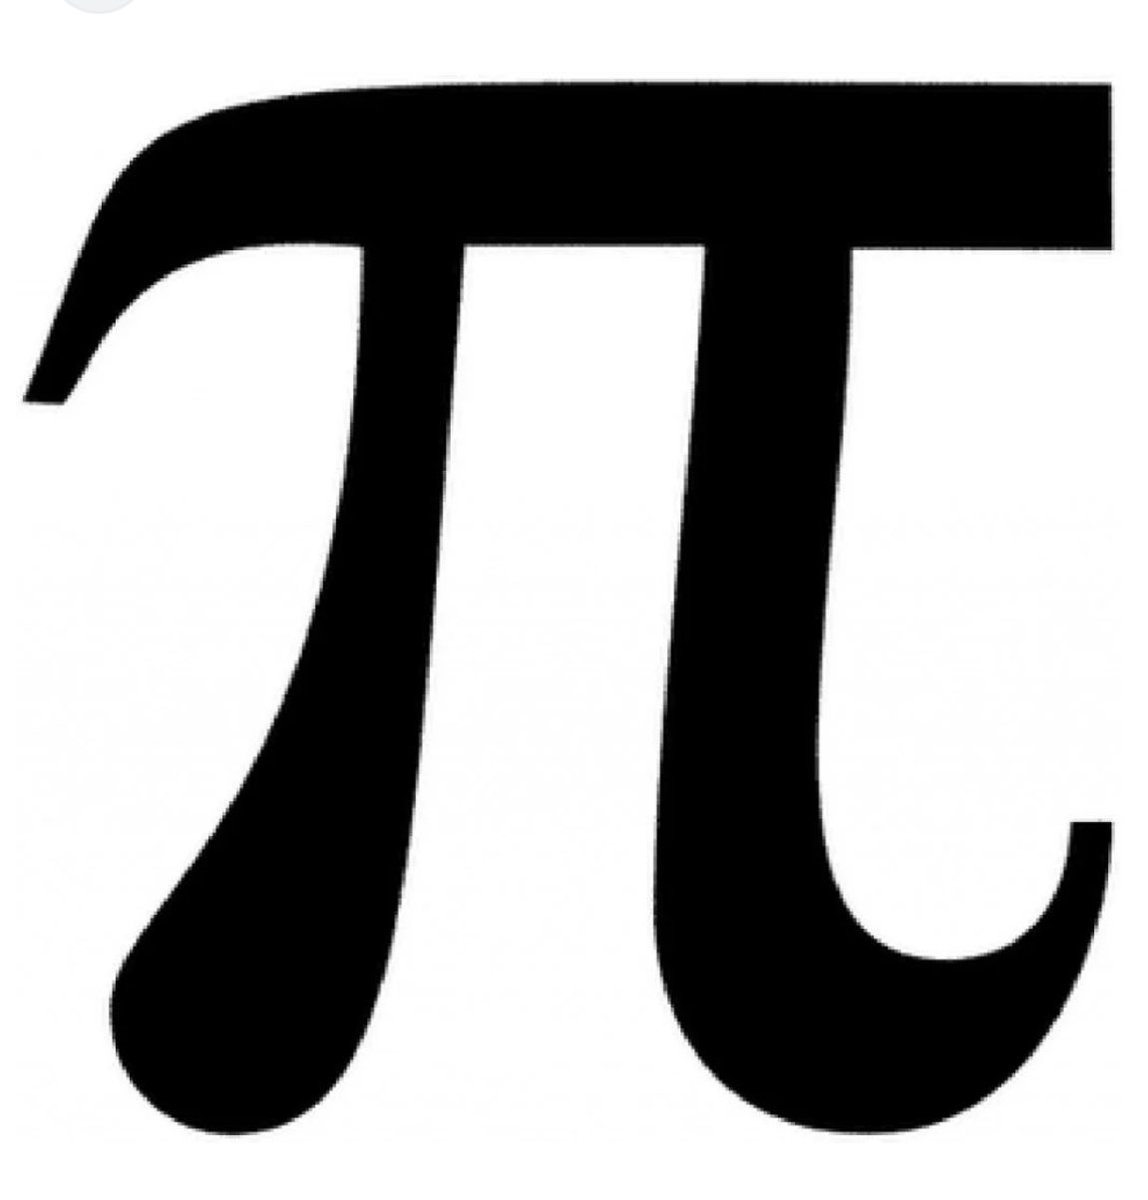 March 14 Happy birthday Albert Einstein - Born today in 1879. Happy Pi Day (3.14) to everyone else. Measure the circumference of a flat circle of any size. Divide by its diameter, and you get Pi. The approximation 3.14 is 99.95% accurate. Good for most Pi emergencies.